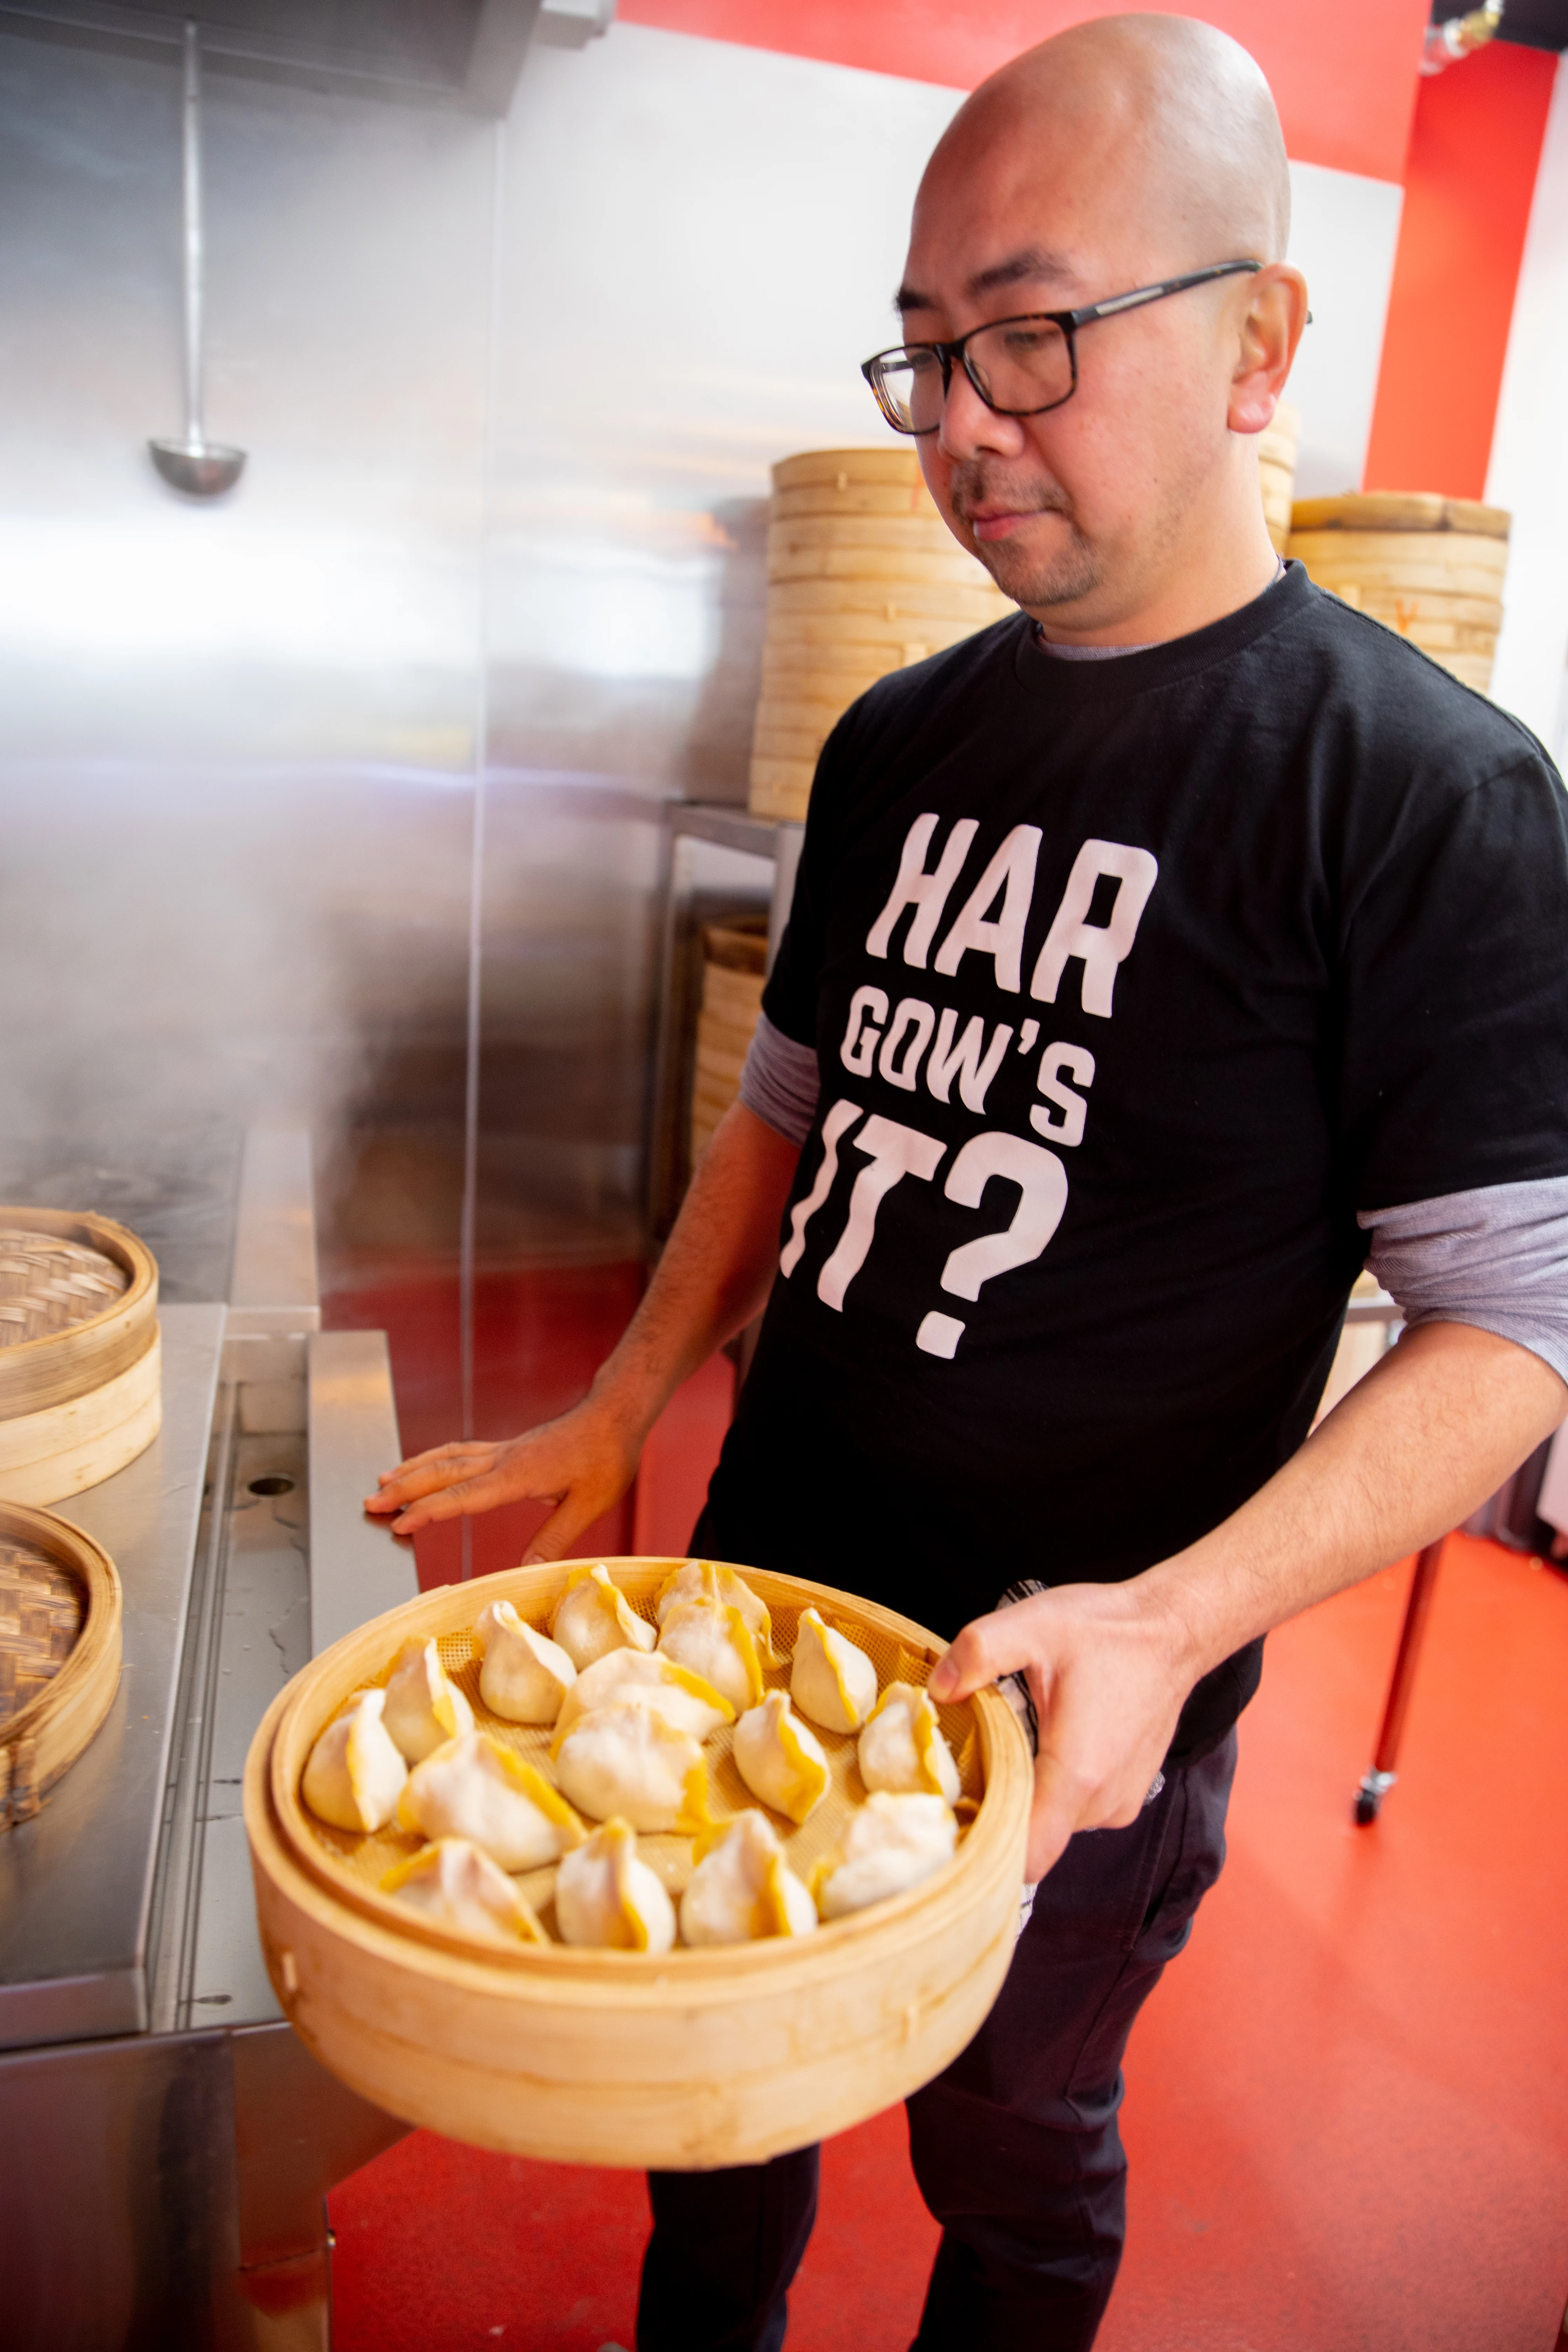 Gordon Kong stands in a commercial kitchen. He is holding a bamboo steamer filled with dumplings.